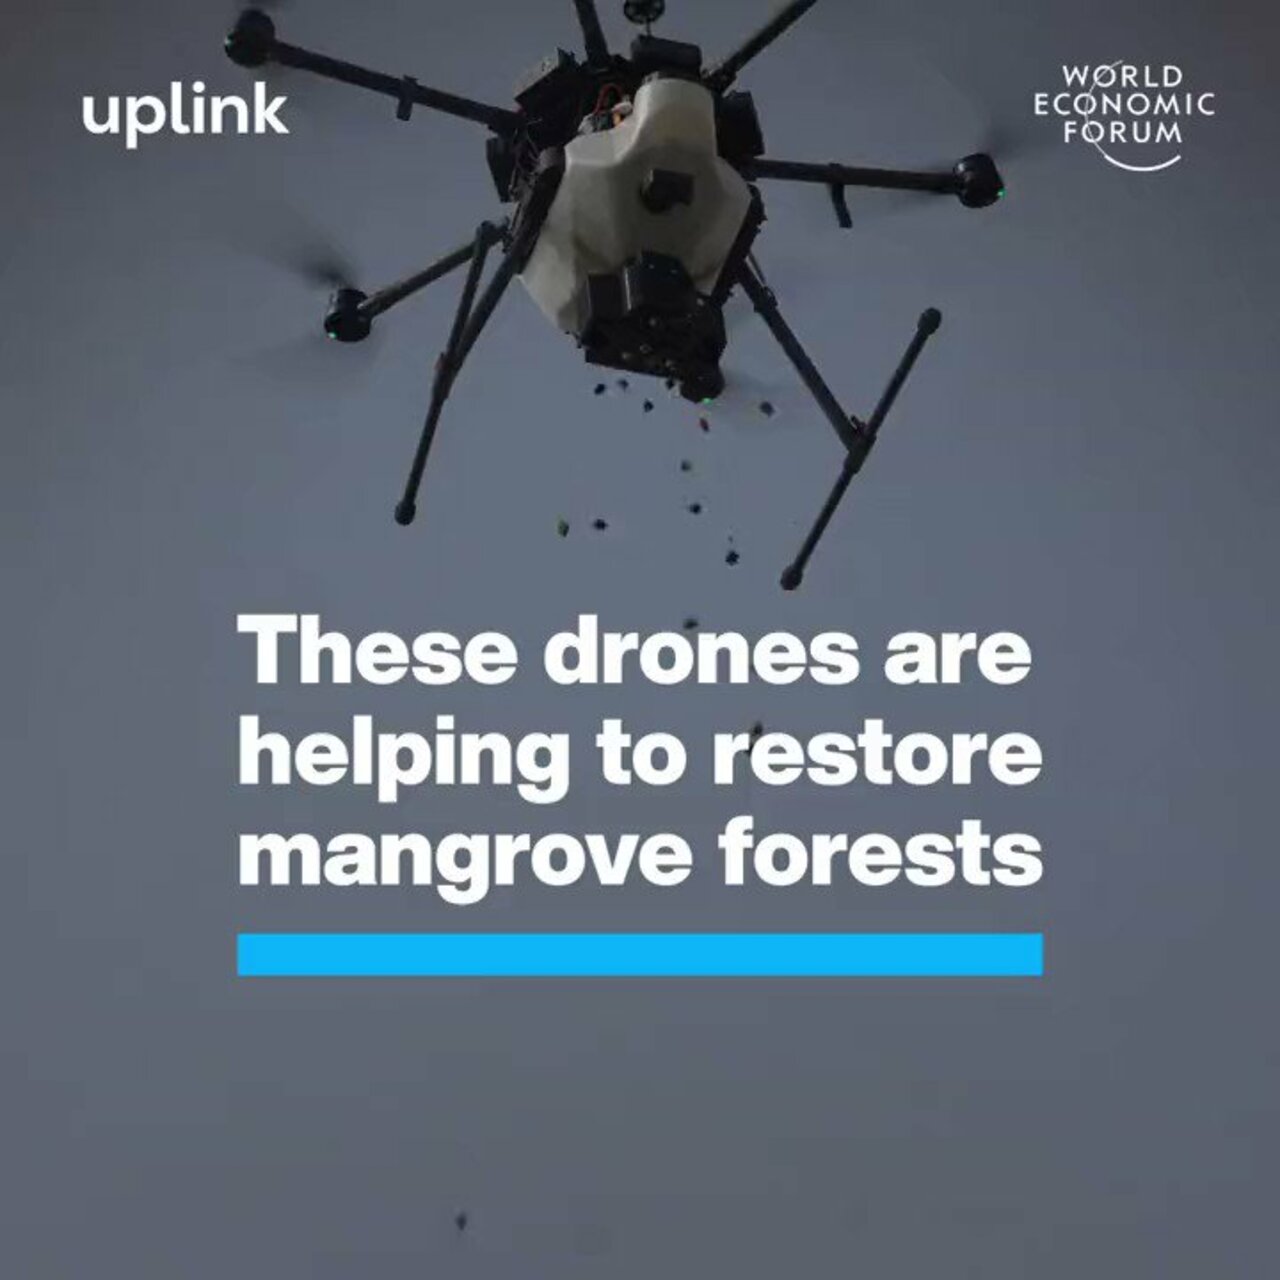 These #Drones are helping to restore mangrove forests by @wef #MachineLearning #AI #ArtificialIntelligence #Sustainability #Innovation #Tech #Technology cc: @maxjcm @ronald_vanloon @pascal_bornet @marcusborba https://t.co/o0JQuOzvq2